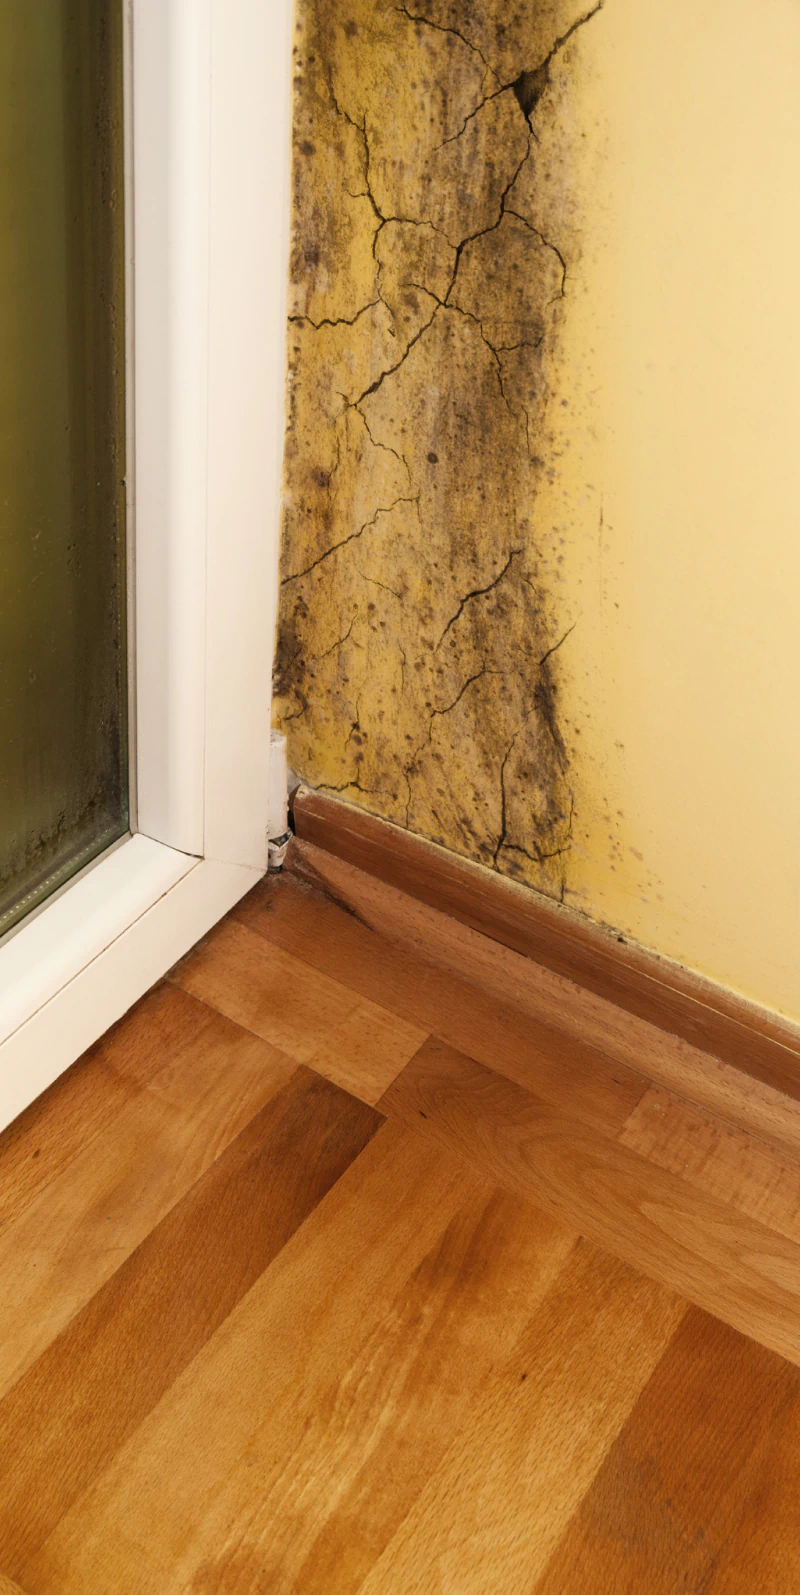 a mold infested corner by the door